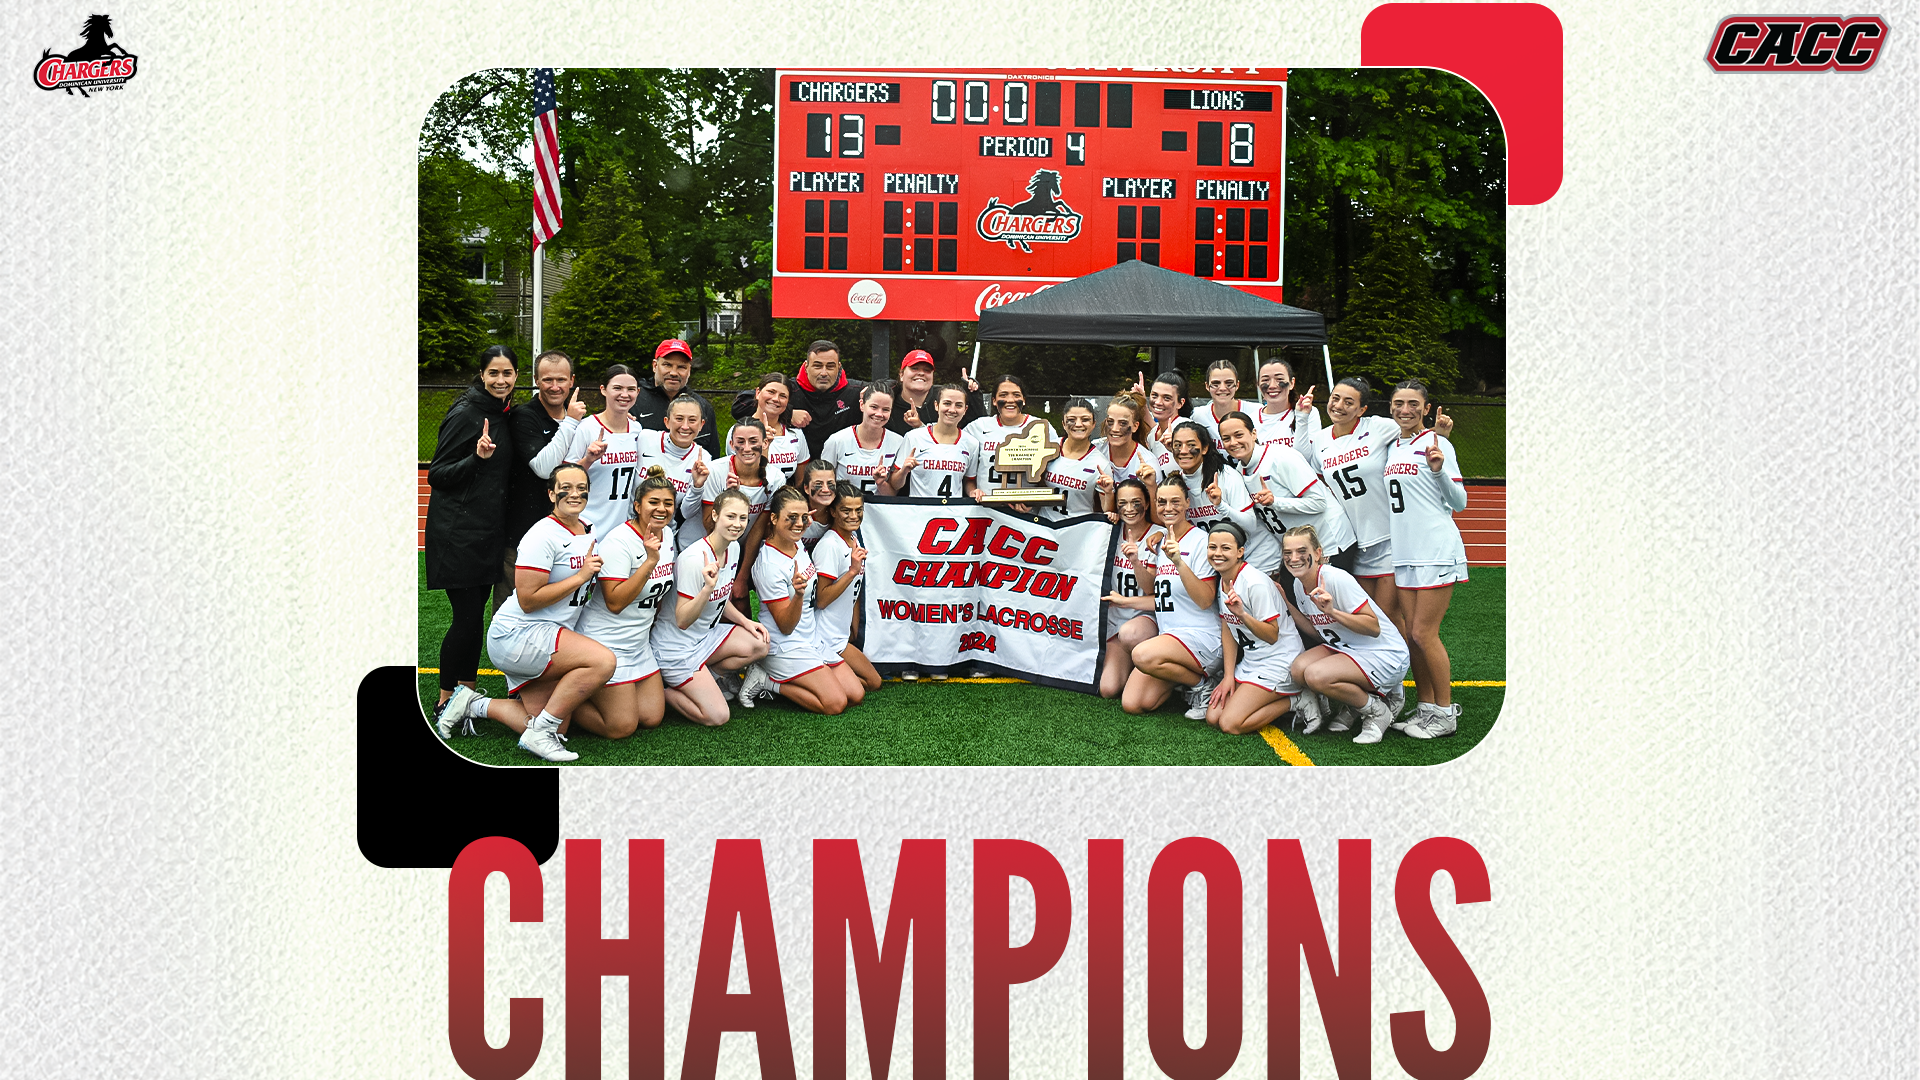 Dominican Claims Second-Consecutive CACC Women's Lacrosse Championship